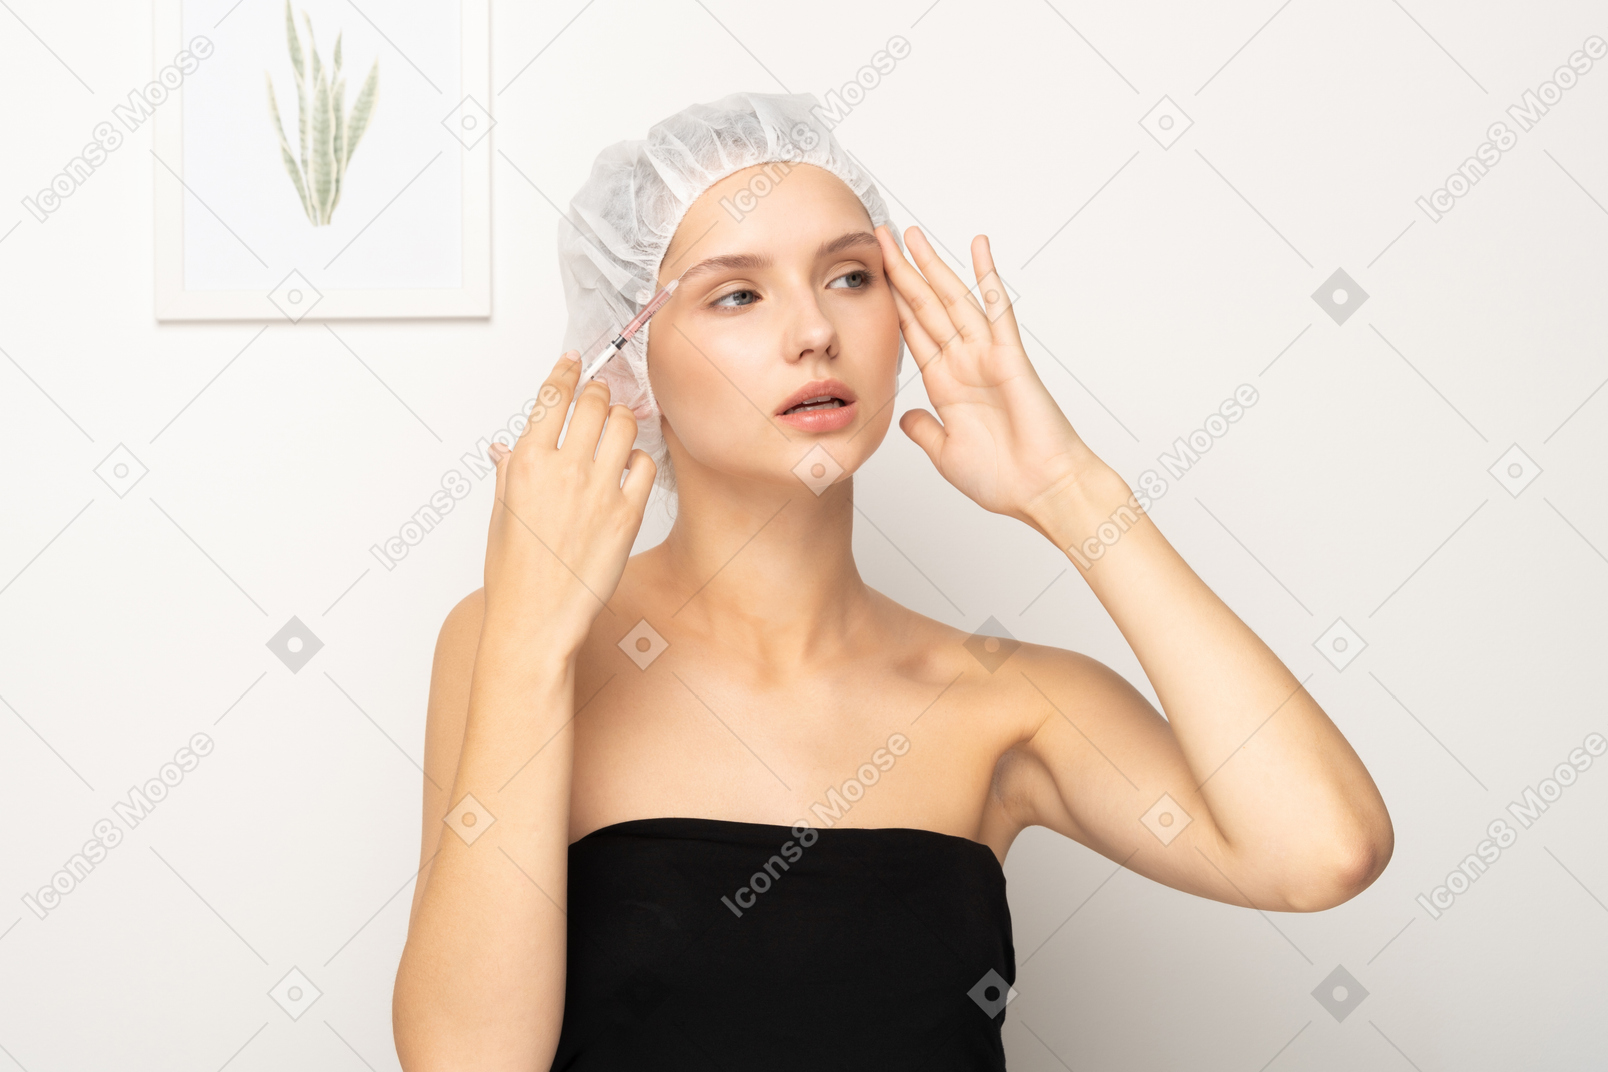 Woman making injection to her forehead